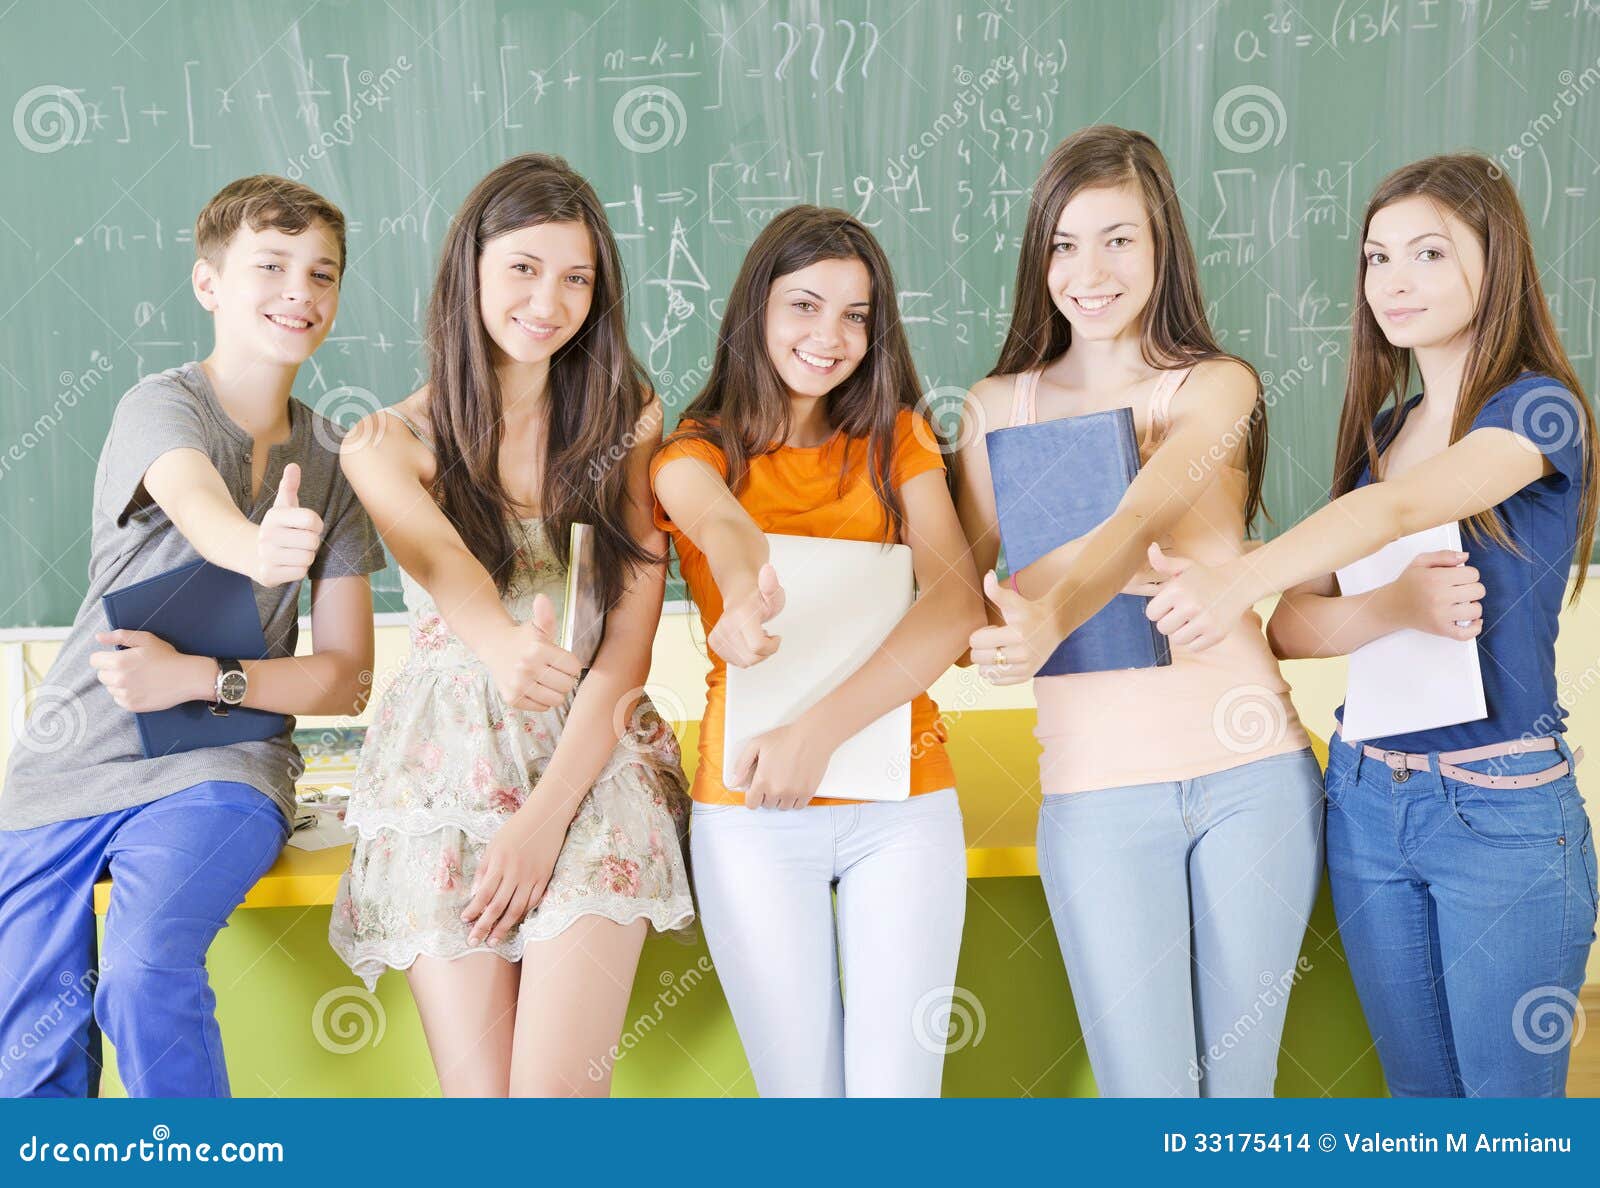 Students With Thumbs Up Royalty-Free Stock Image | CartoonDealer.com ...